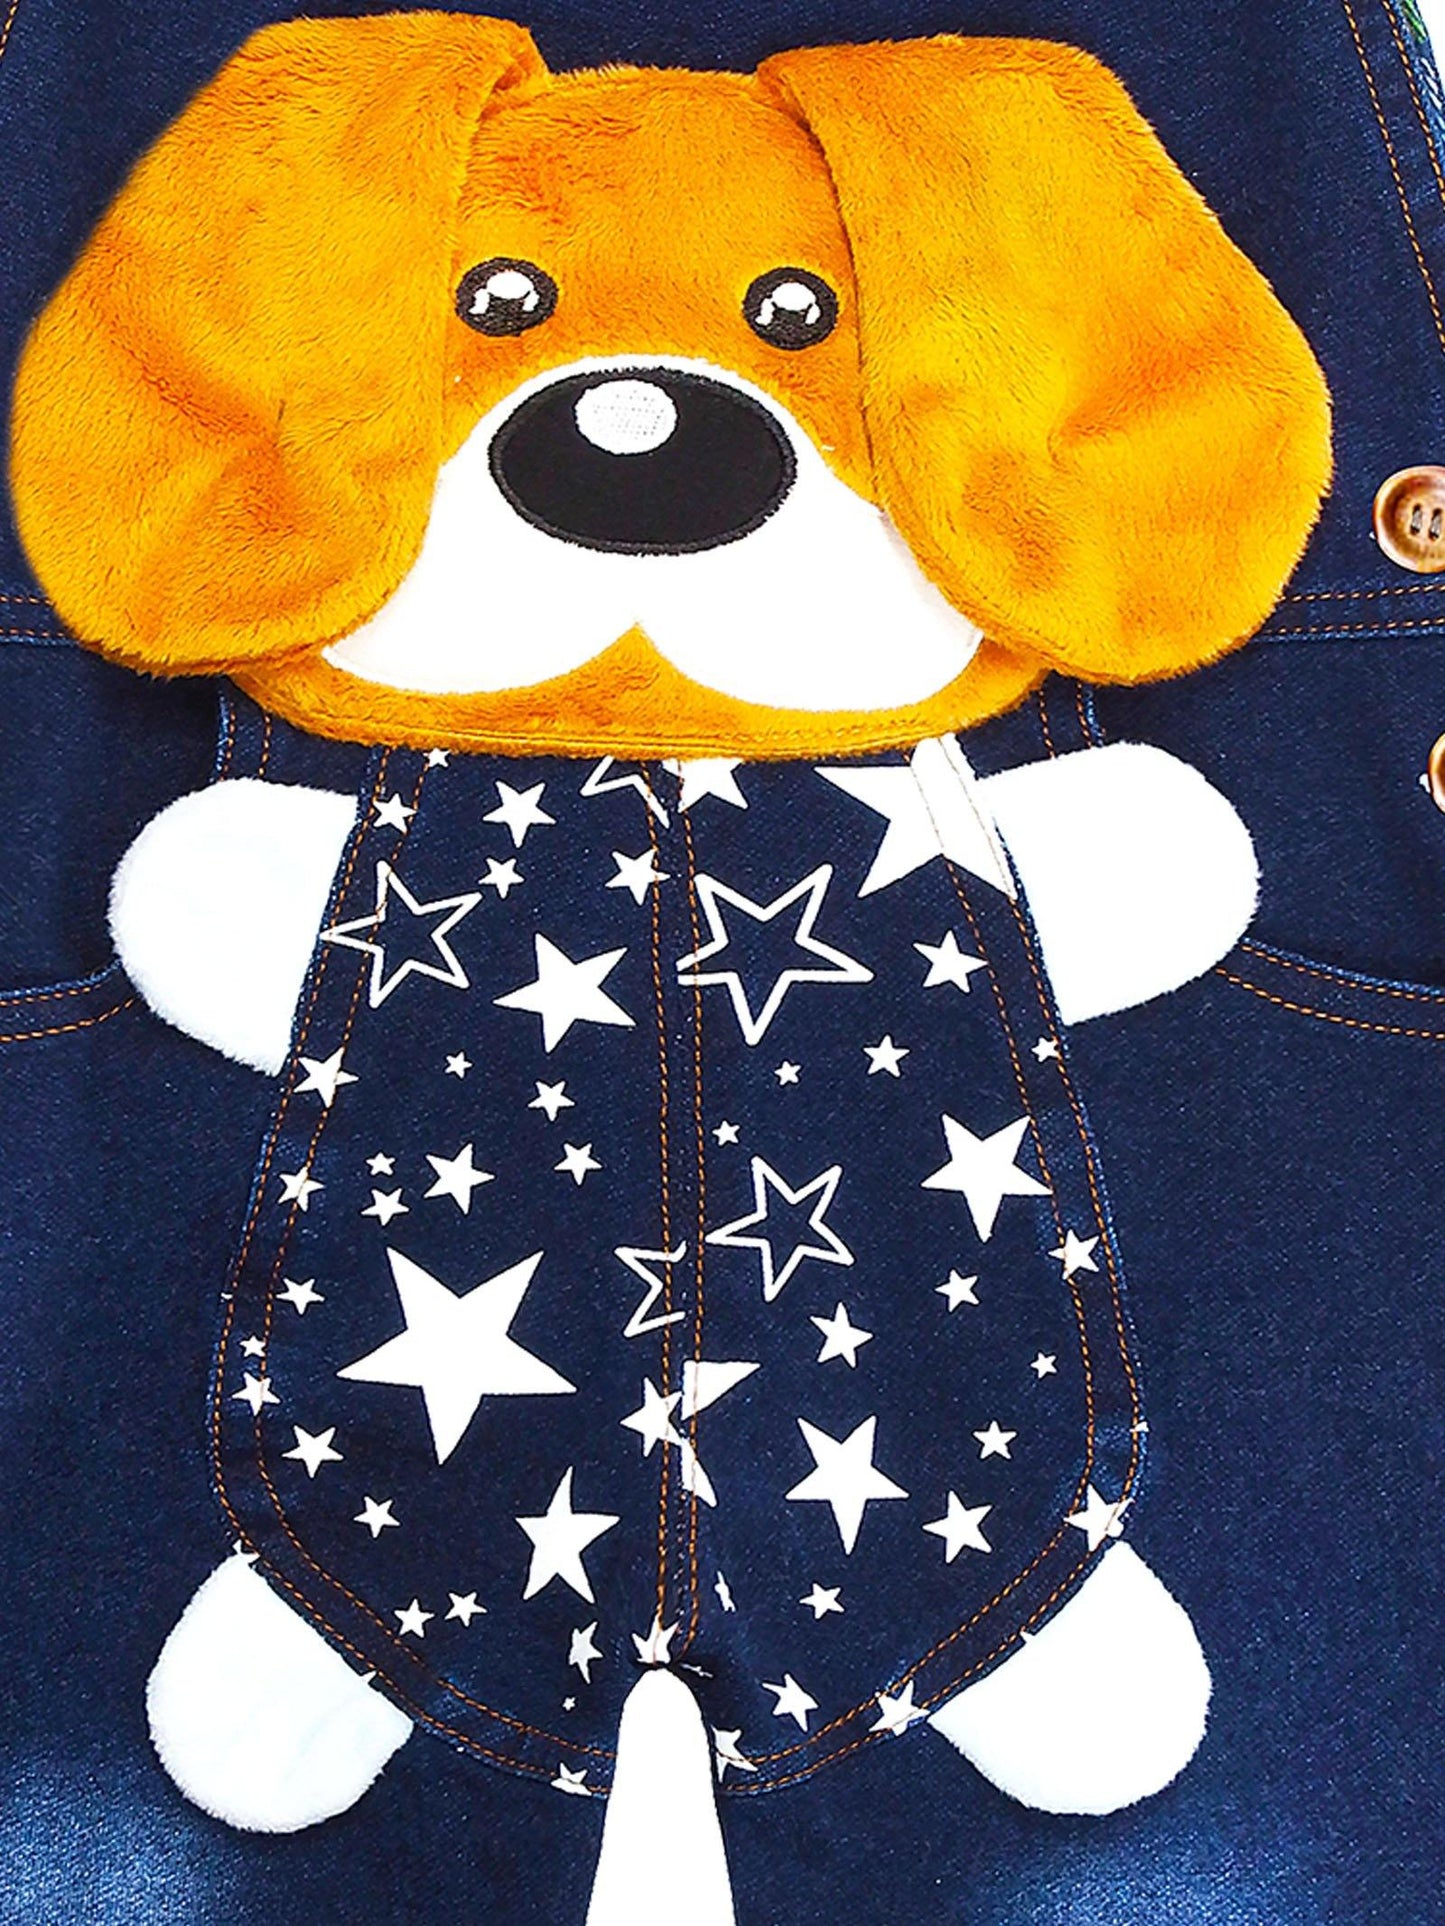 Kidscool Space Baby Cotton 3D Cartoon Dog Soft Knitted Jeans Overalls - Kidscool Space